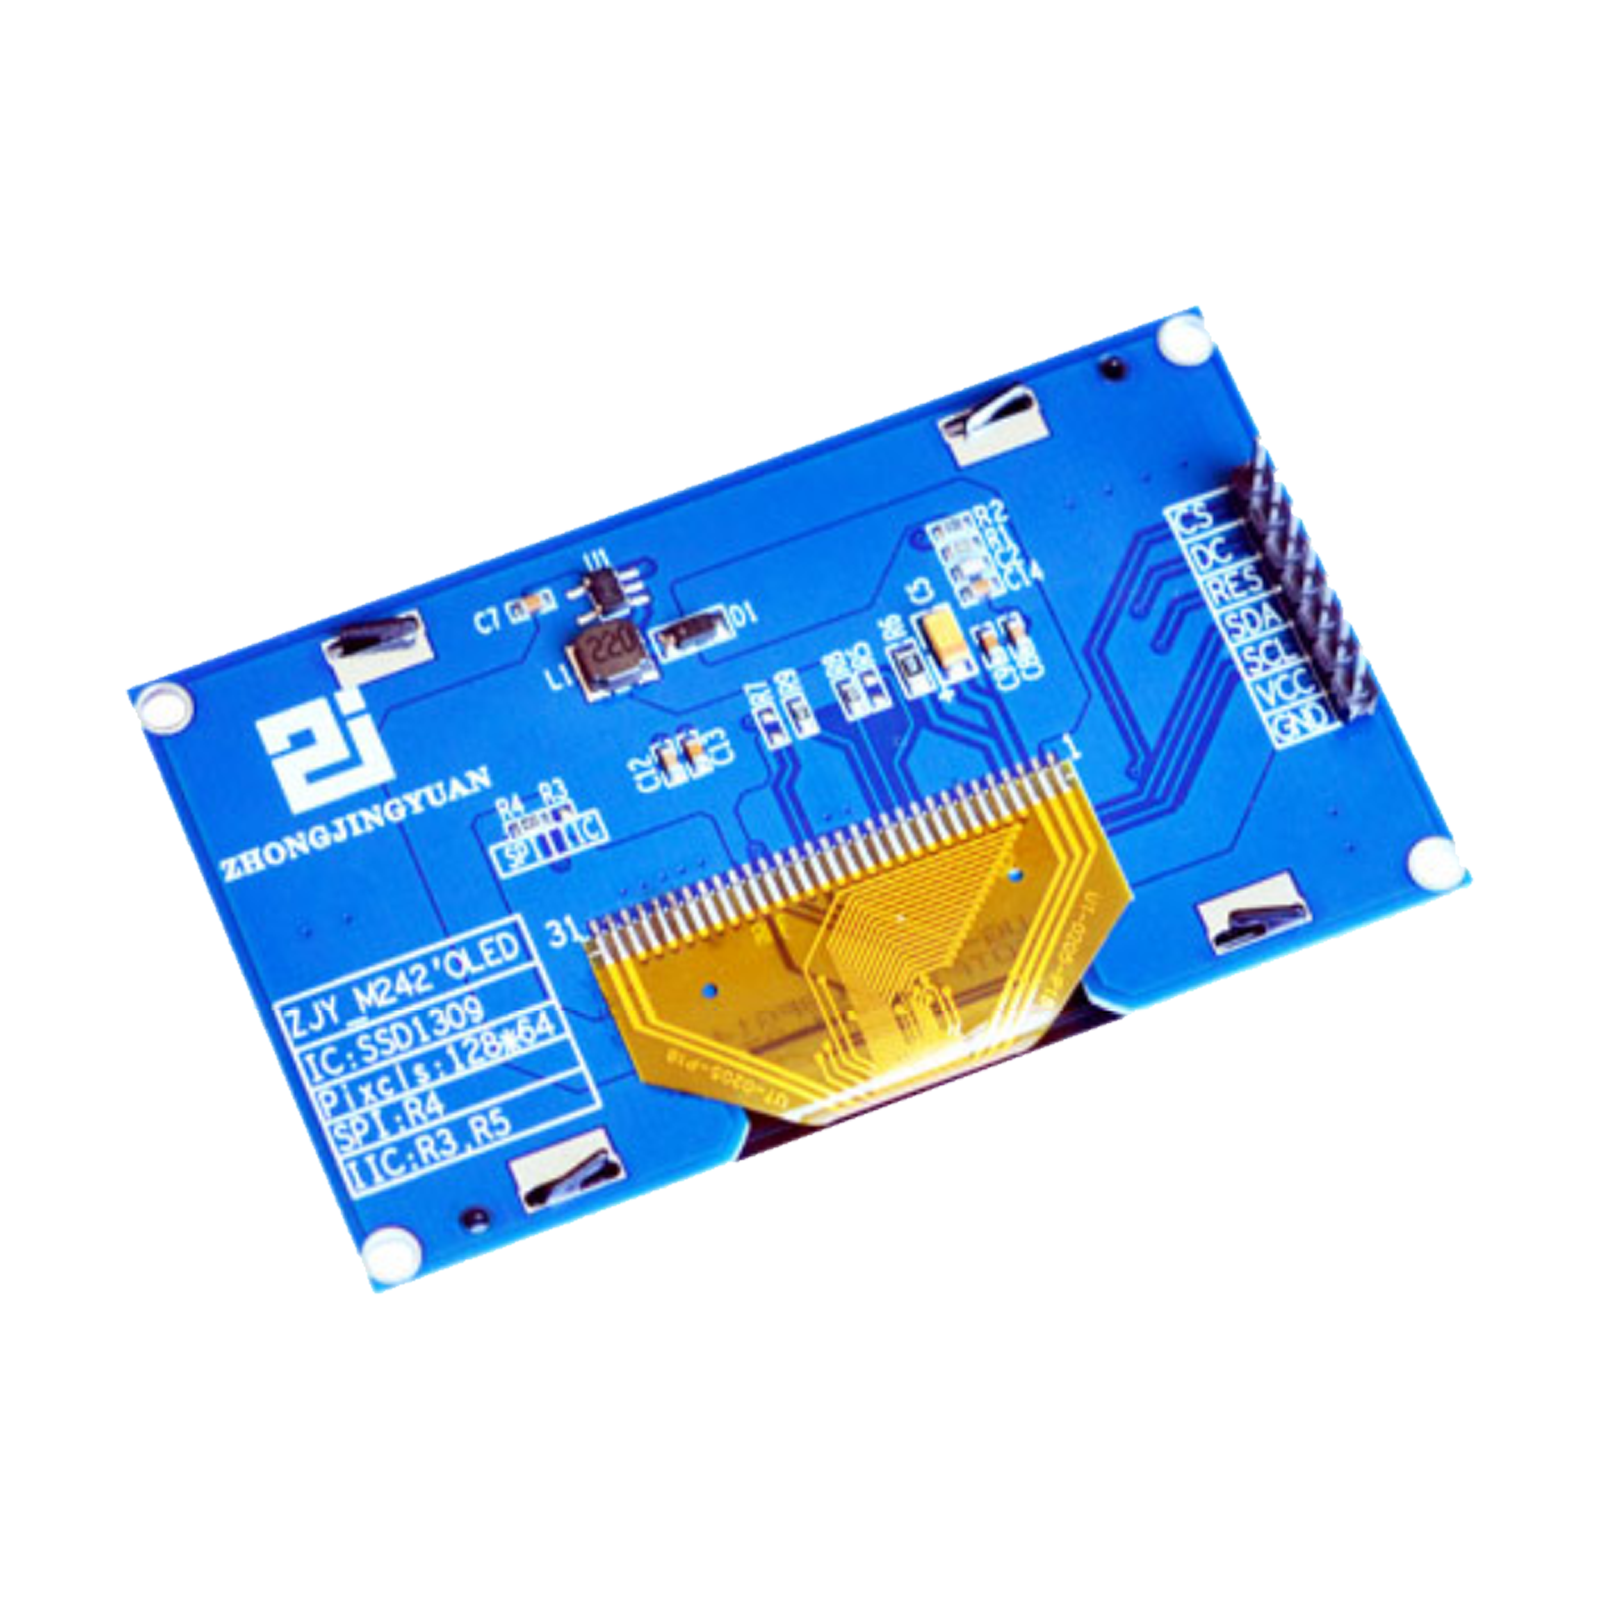 Interfacing 2.42 INCH OLED SPI/I2C Display Module with Arduino